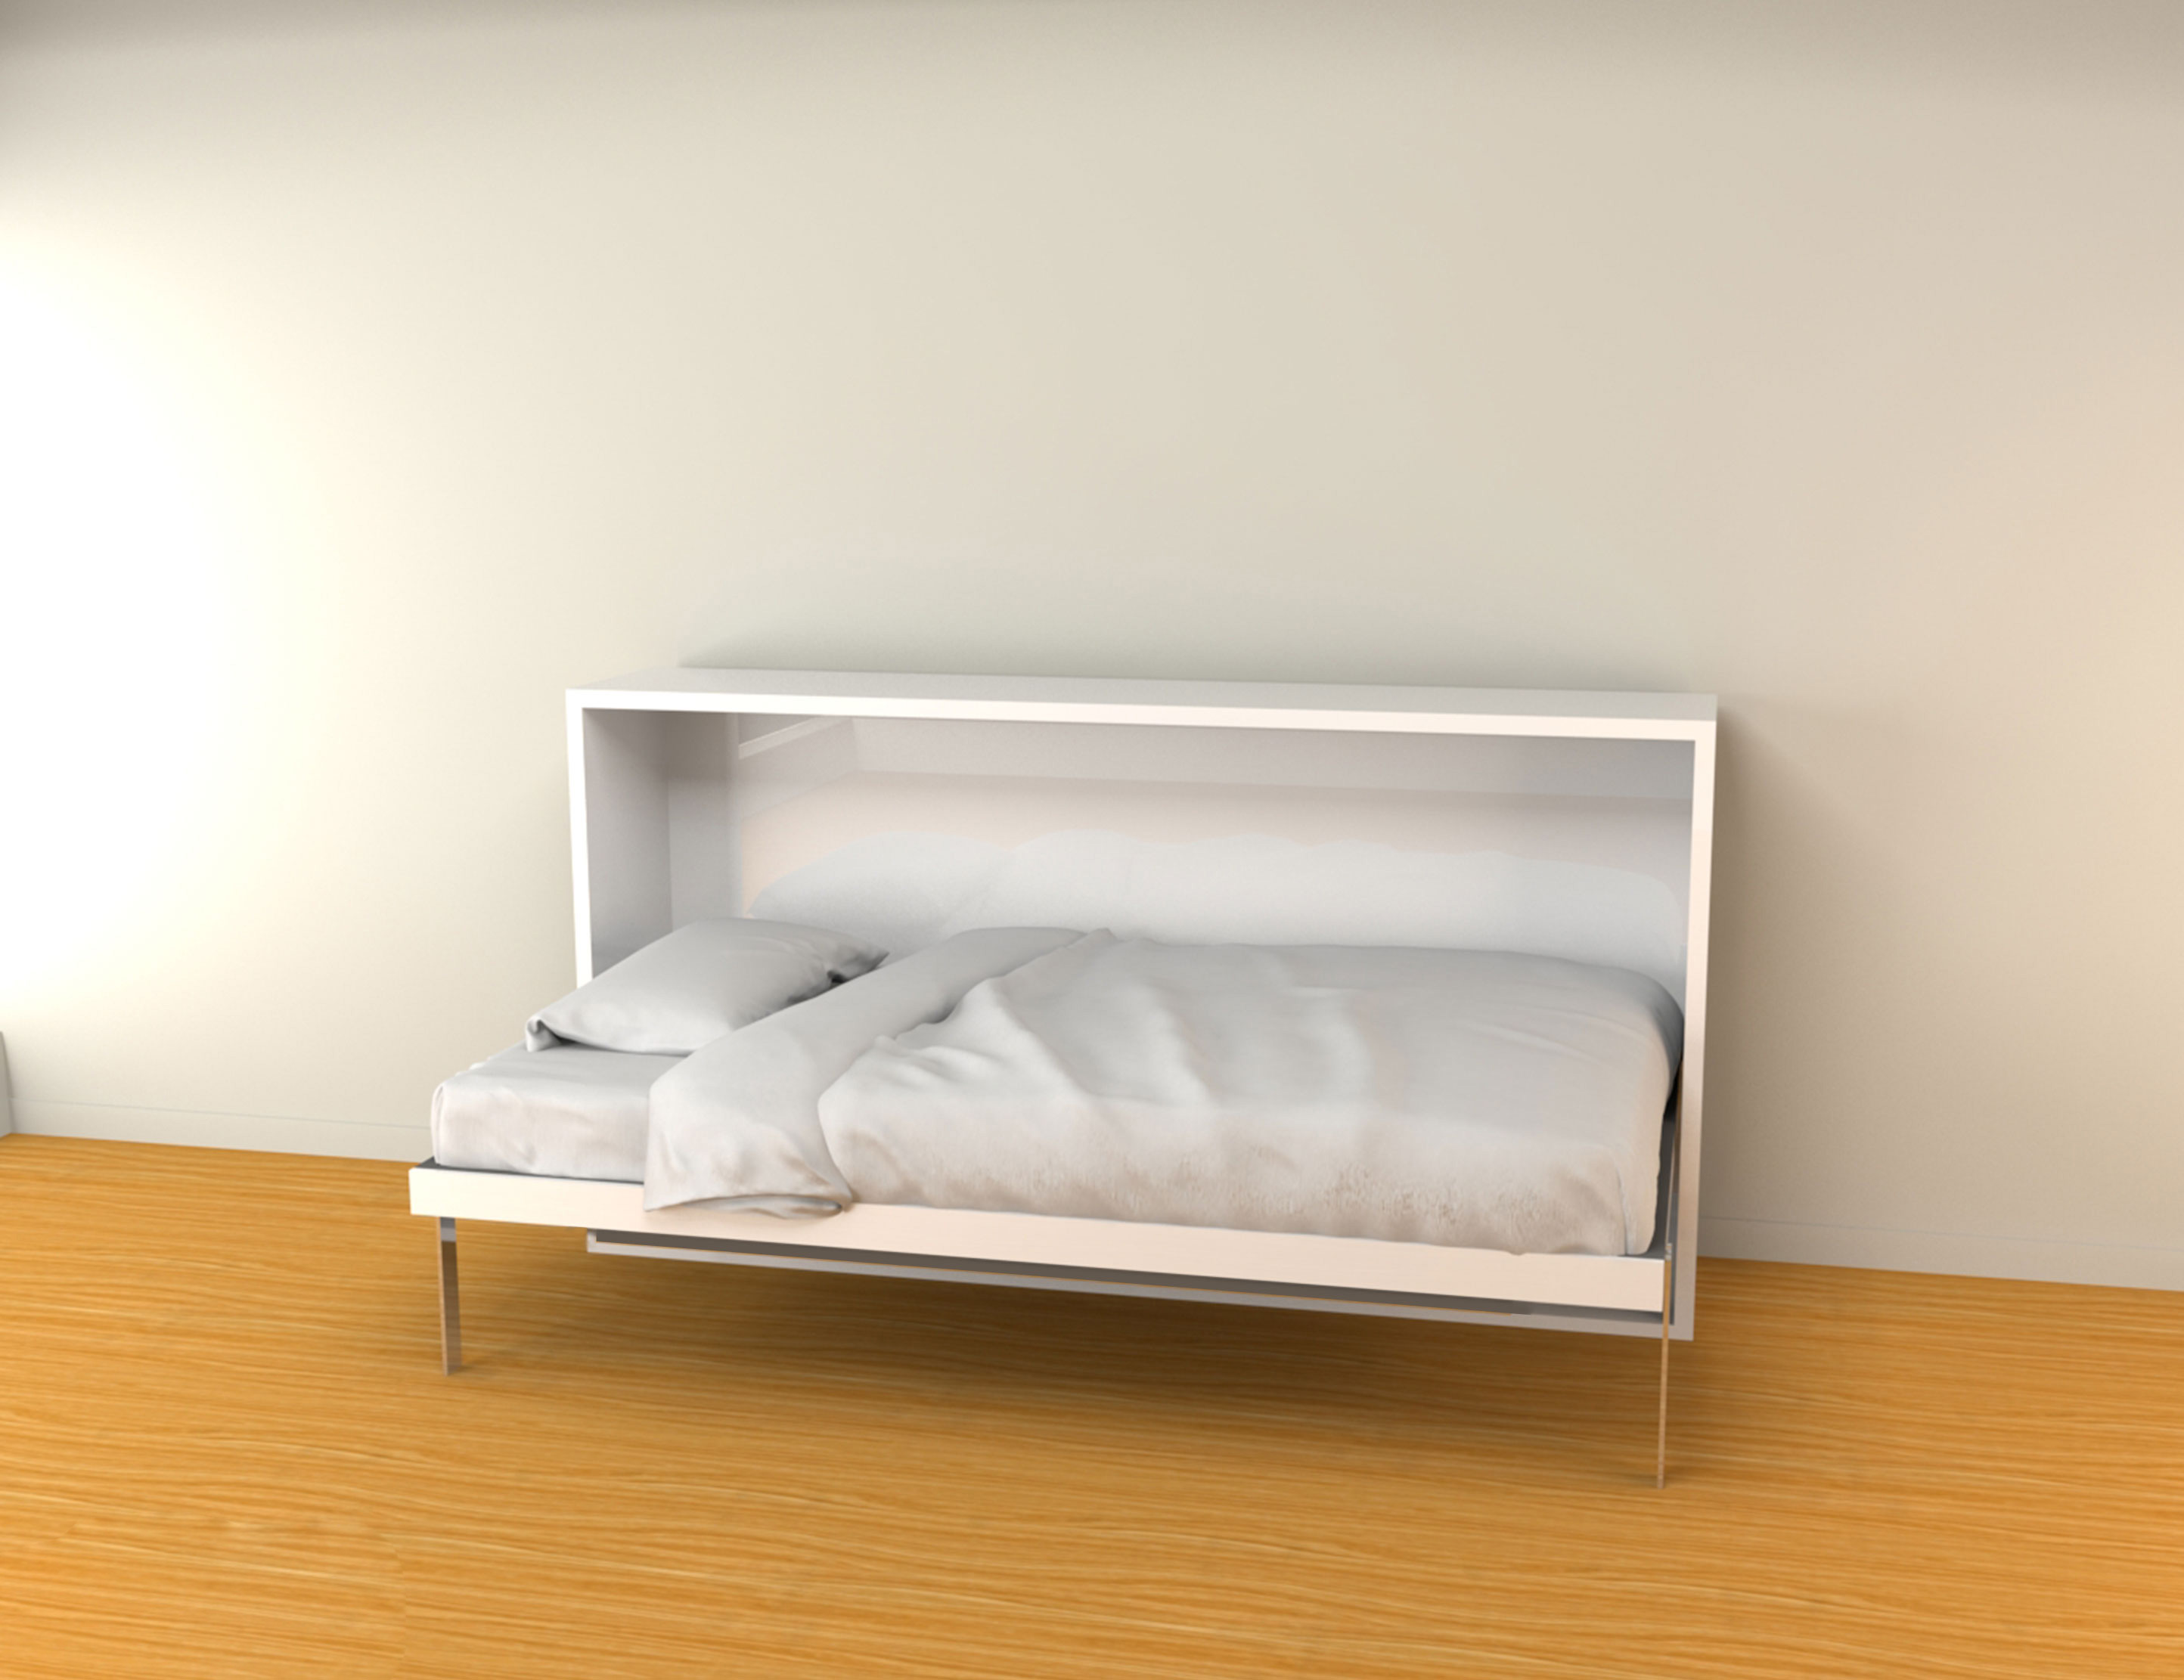 simple frame full horizontal wall bed over sofa